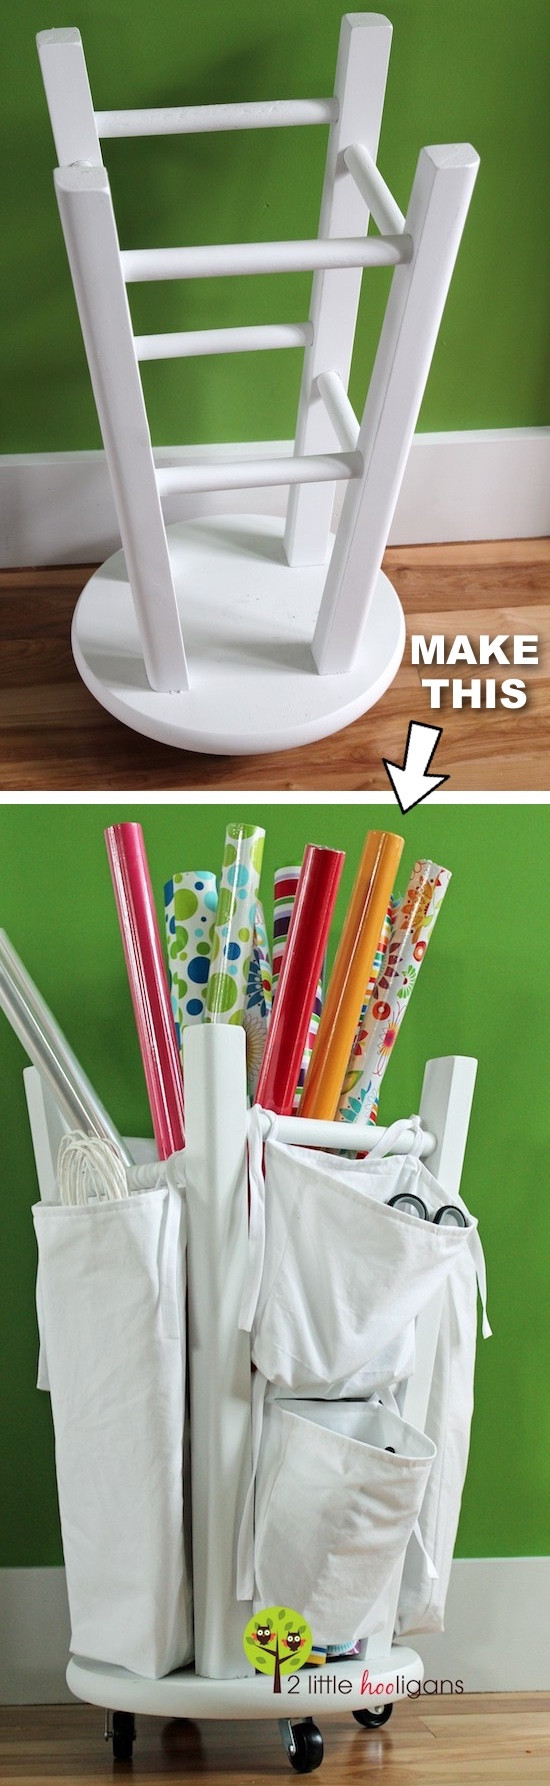 Cardboard Craft Ideas For Adults
 30 Easy Craft Ideas That Will Spark Your Creativity DIY